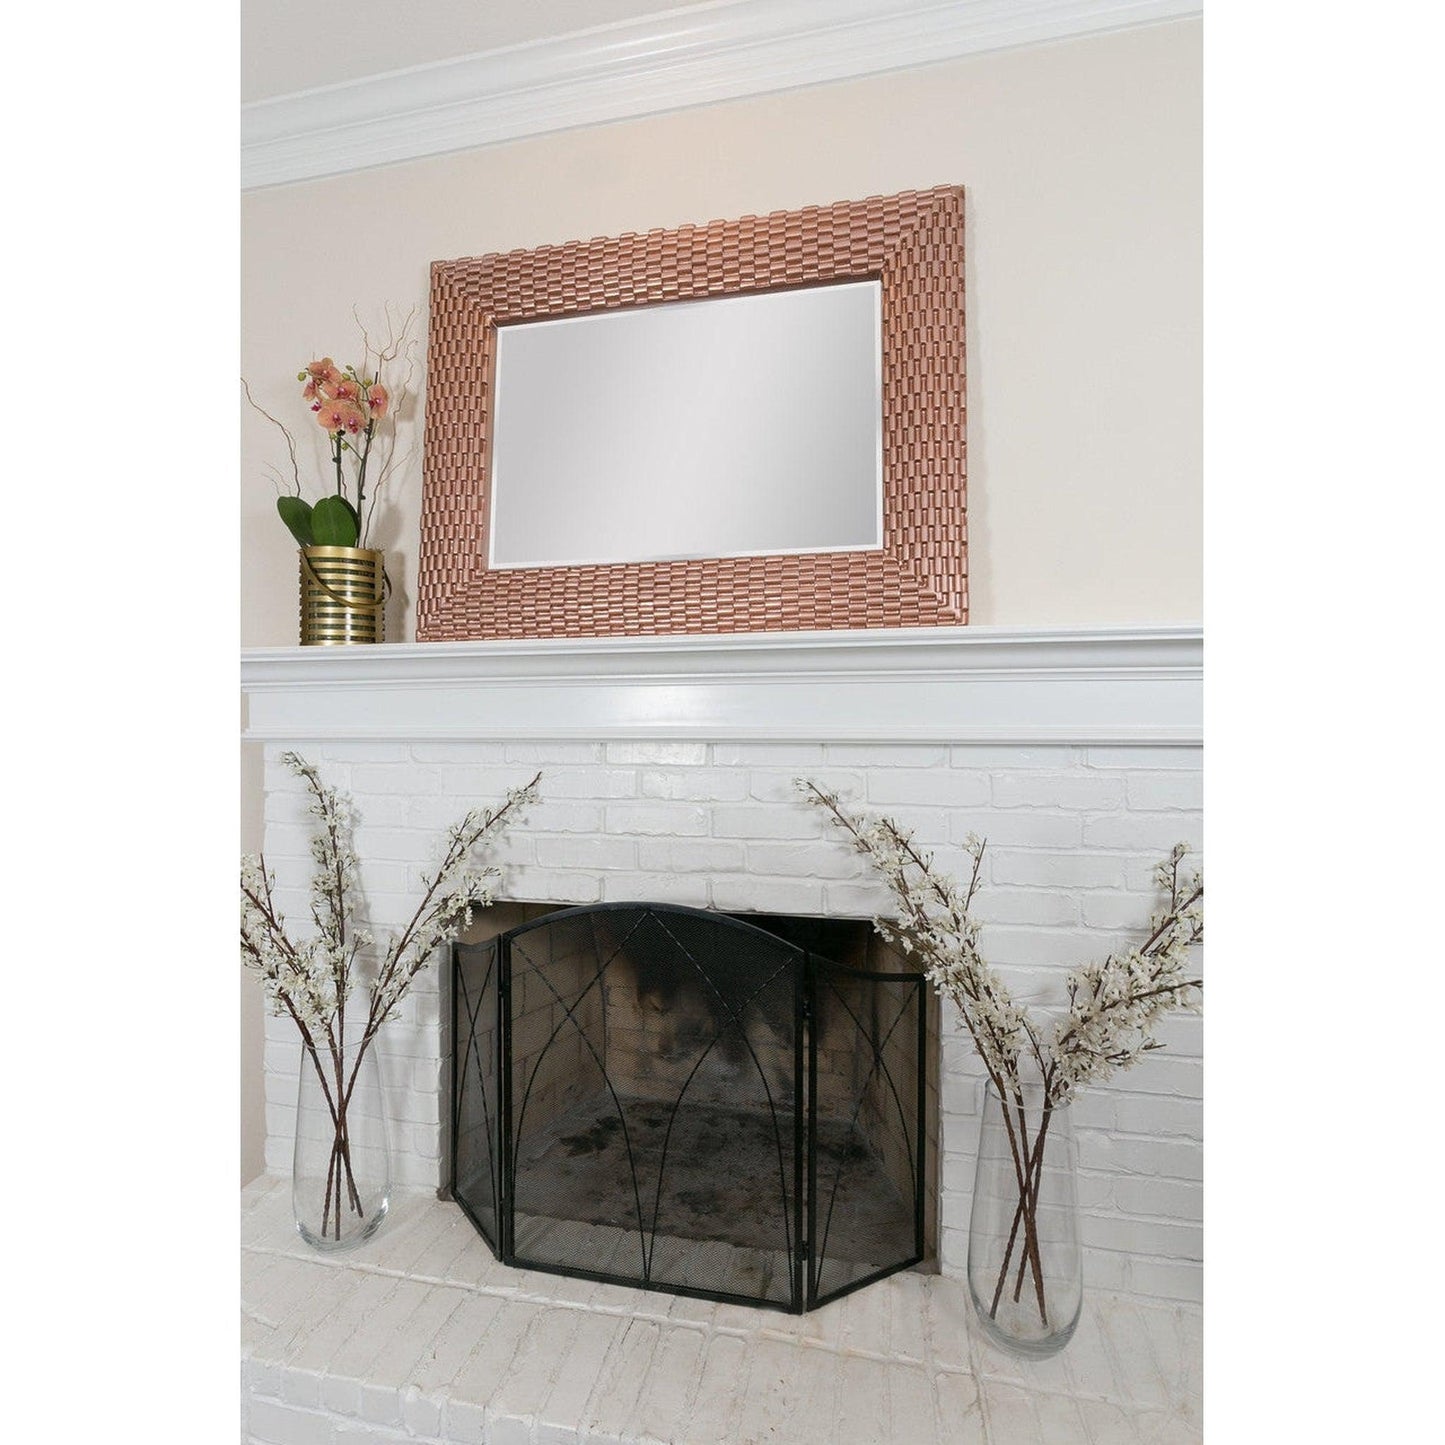 SBC Decor Rose 49" x 37" Wall-Mounted Basket Weave Texture Wood Frame Dresser Large Wall Mirror In Rose Gold Finish